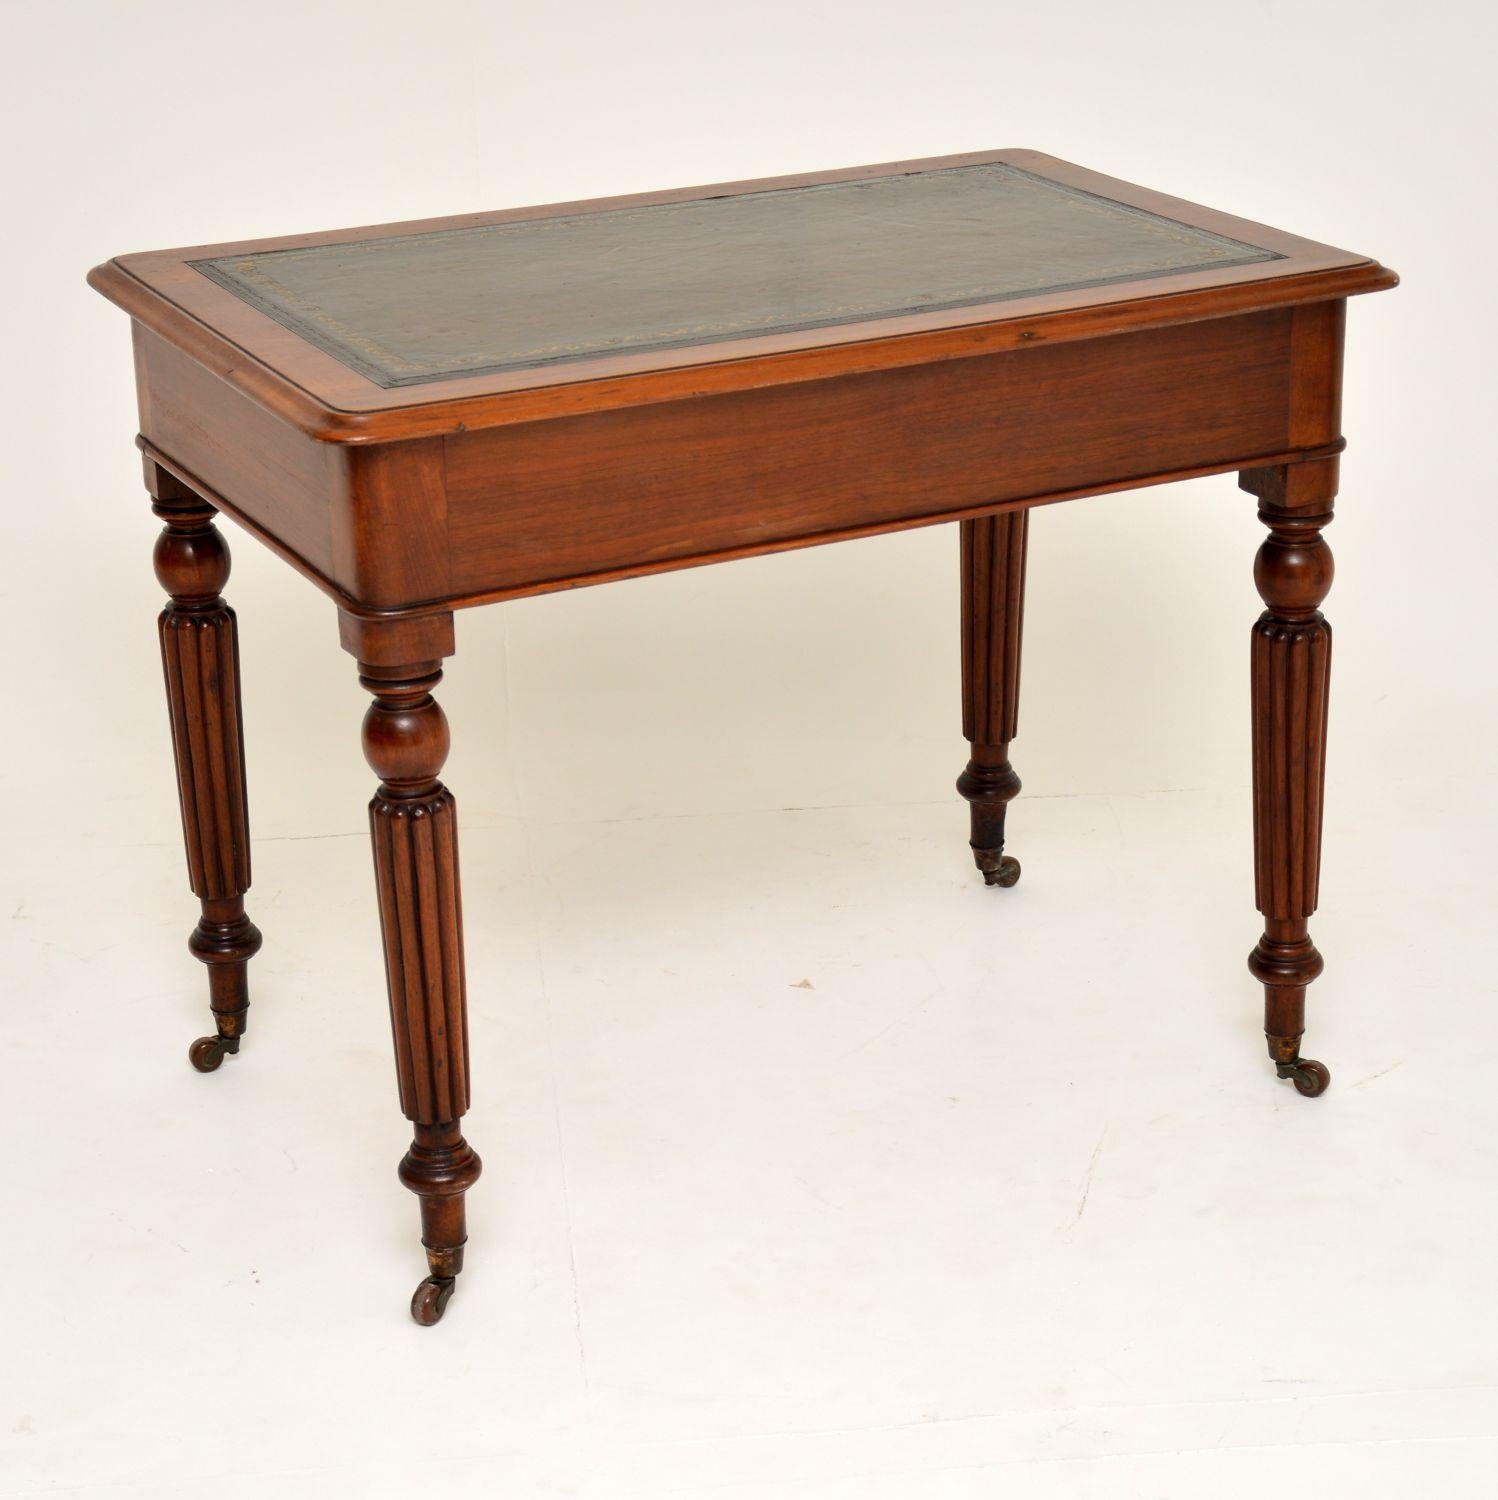 English Antique Victorian Mahogany and Leather Writing Table or Desk